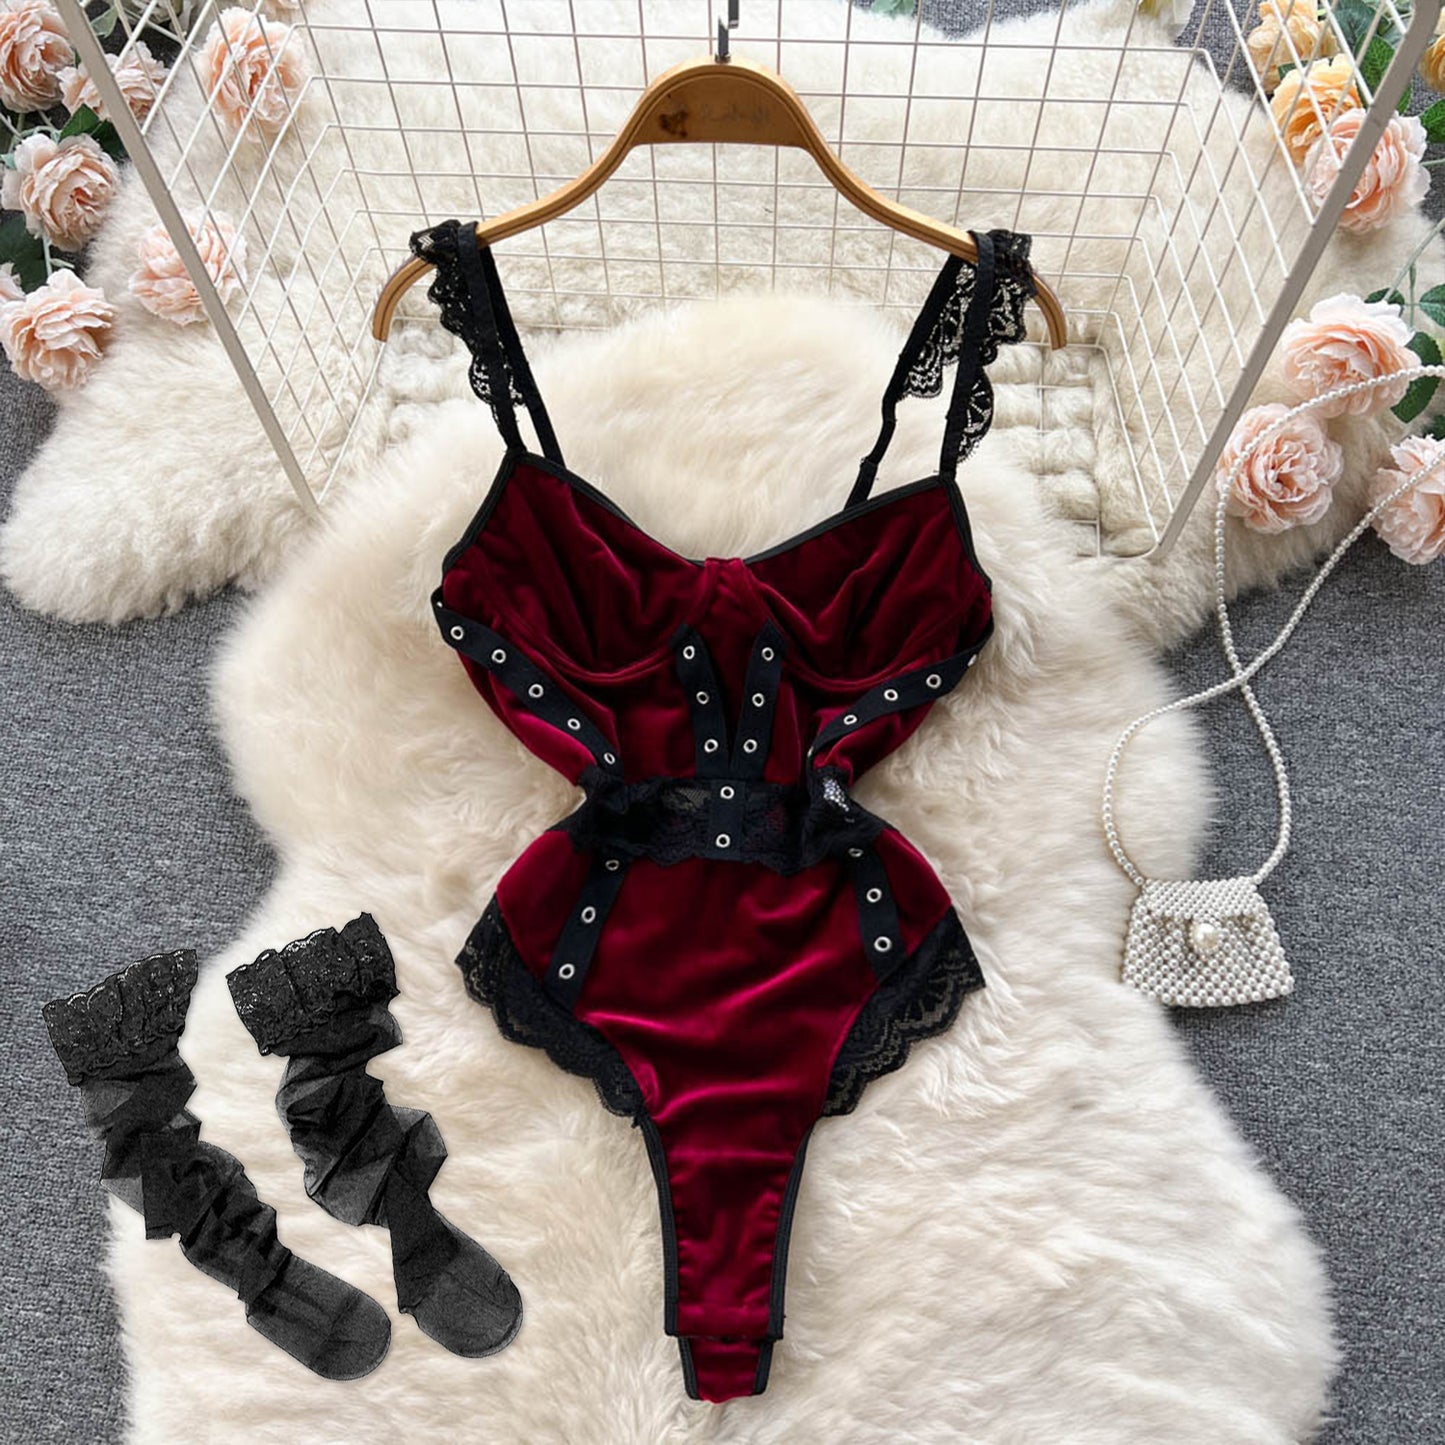 Dame- the Deep Red Velvet Bodysuit with Black Lace